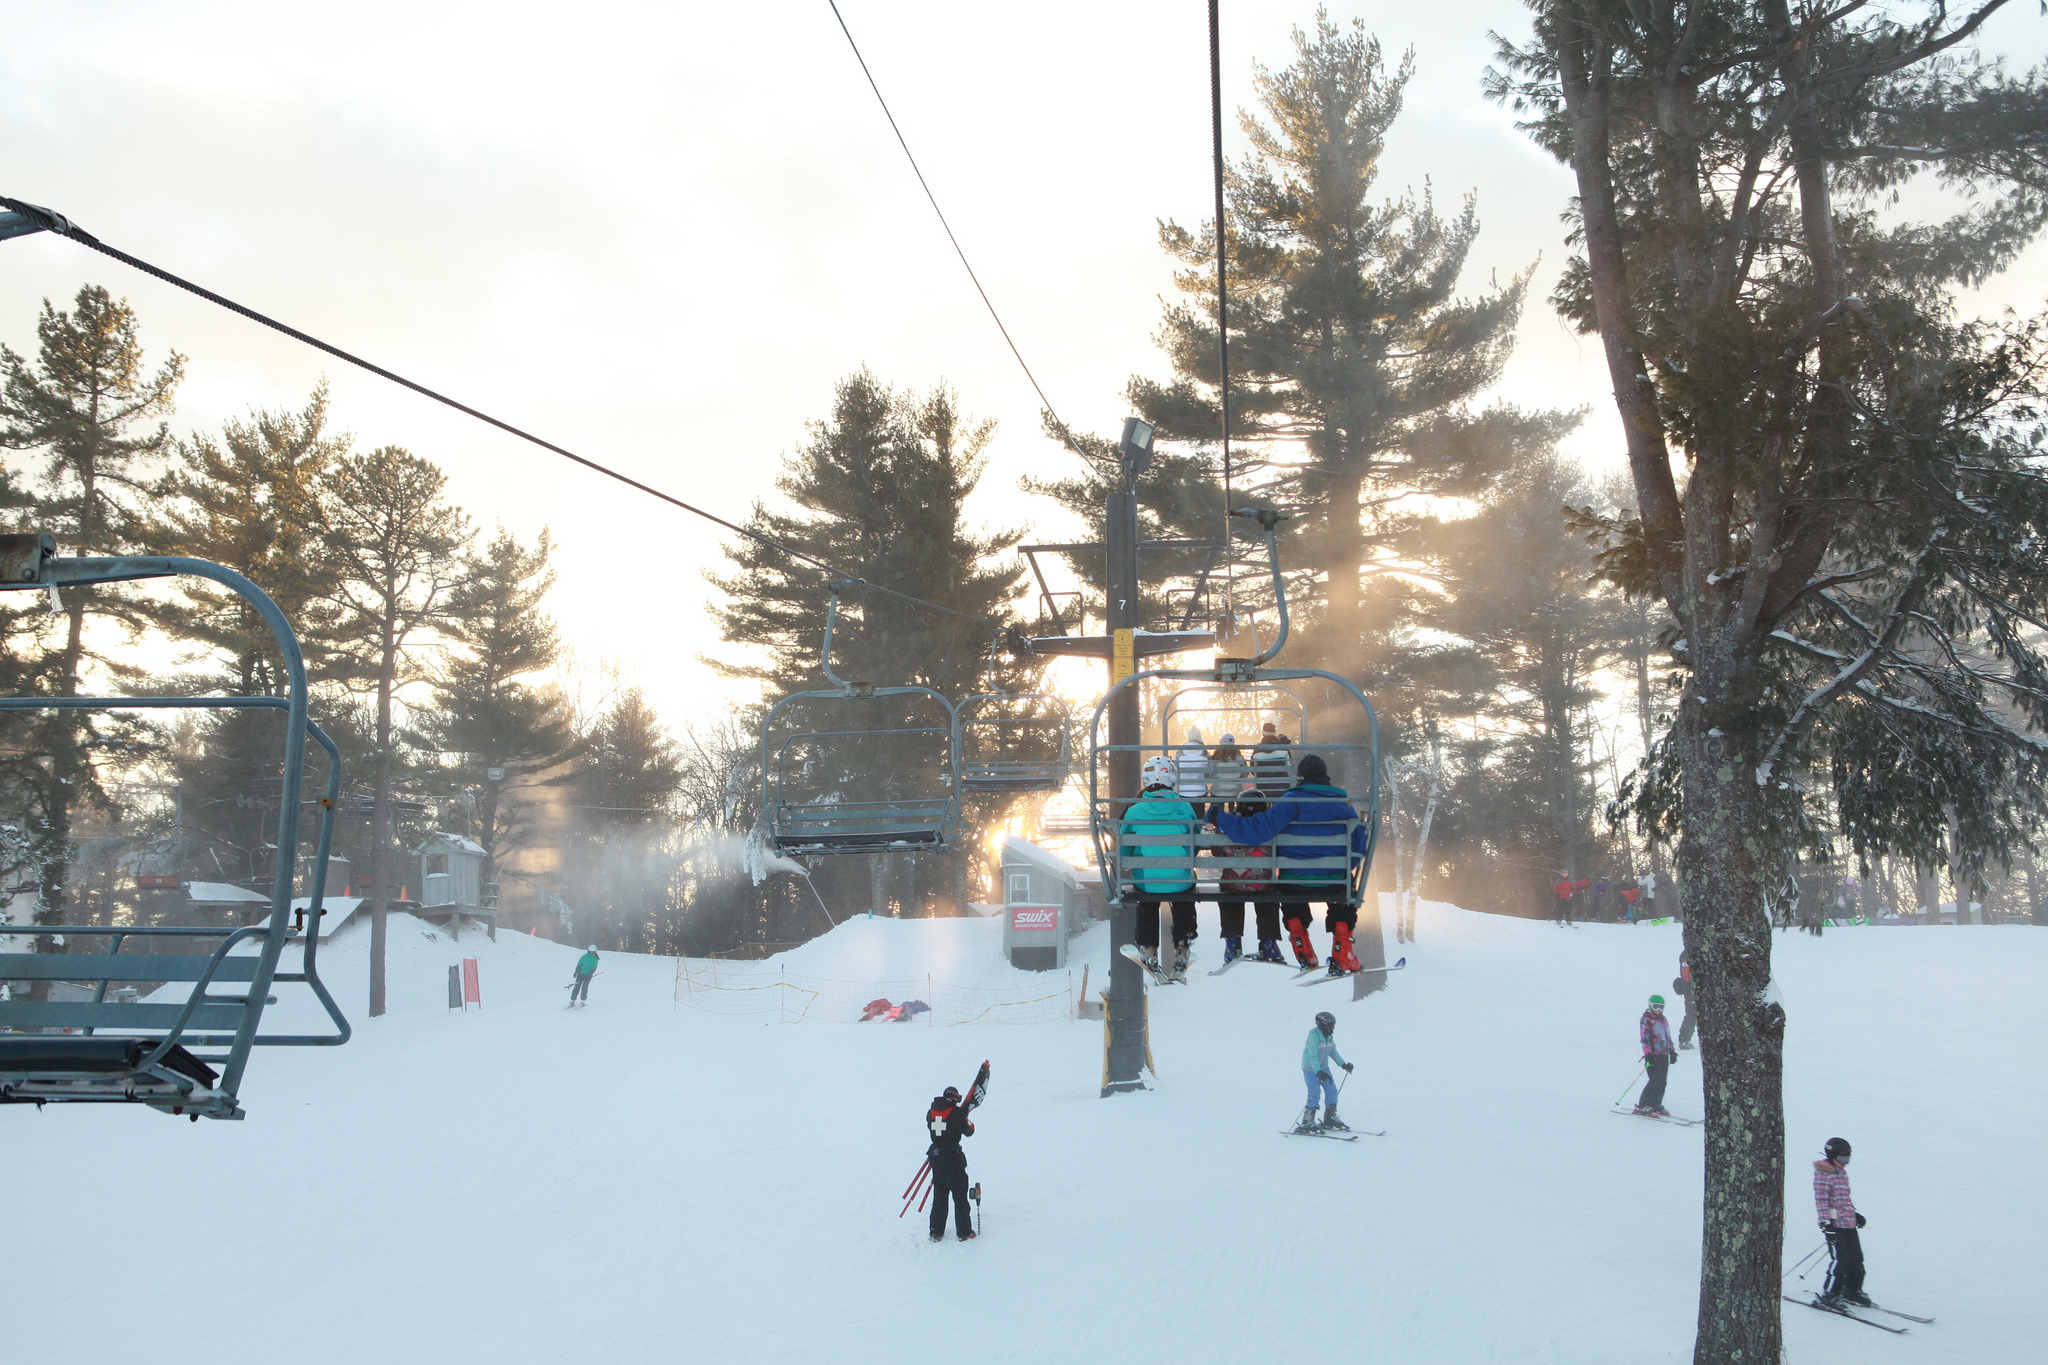 best ski resorts in new hampshire for beginners